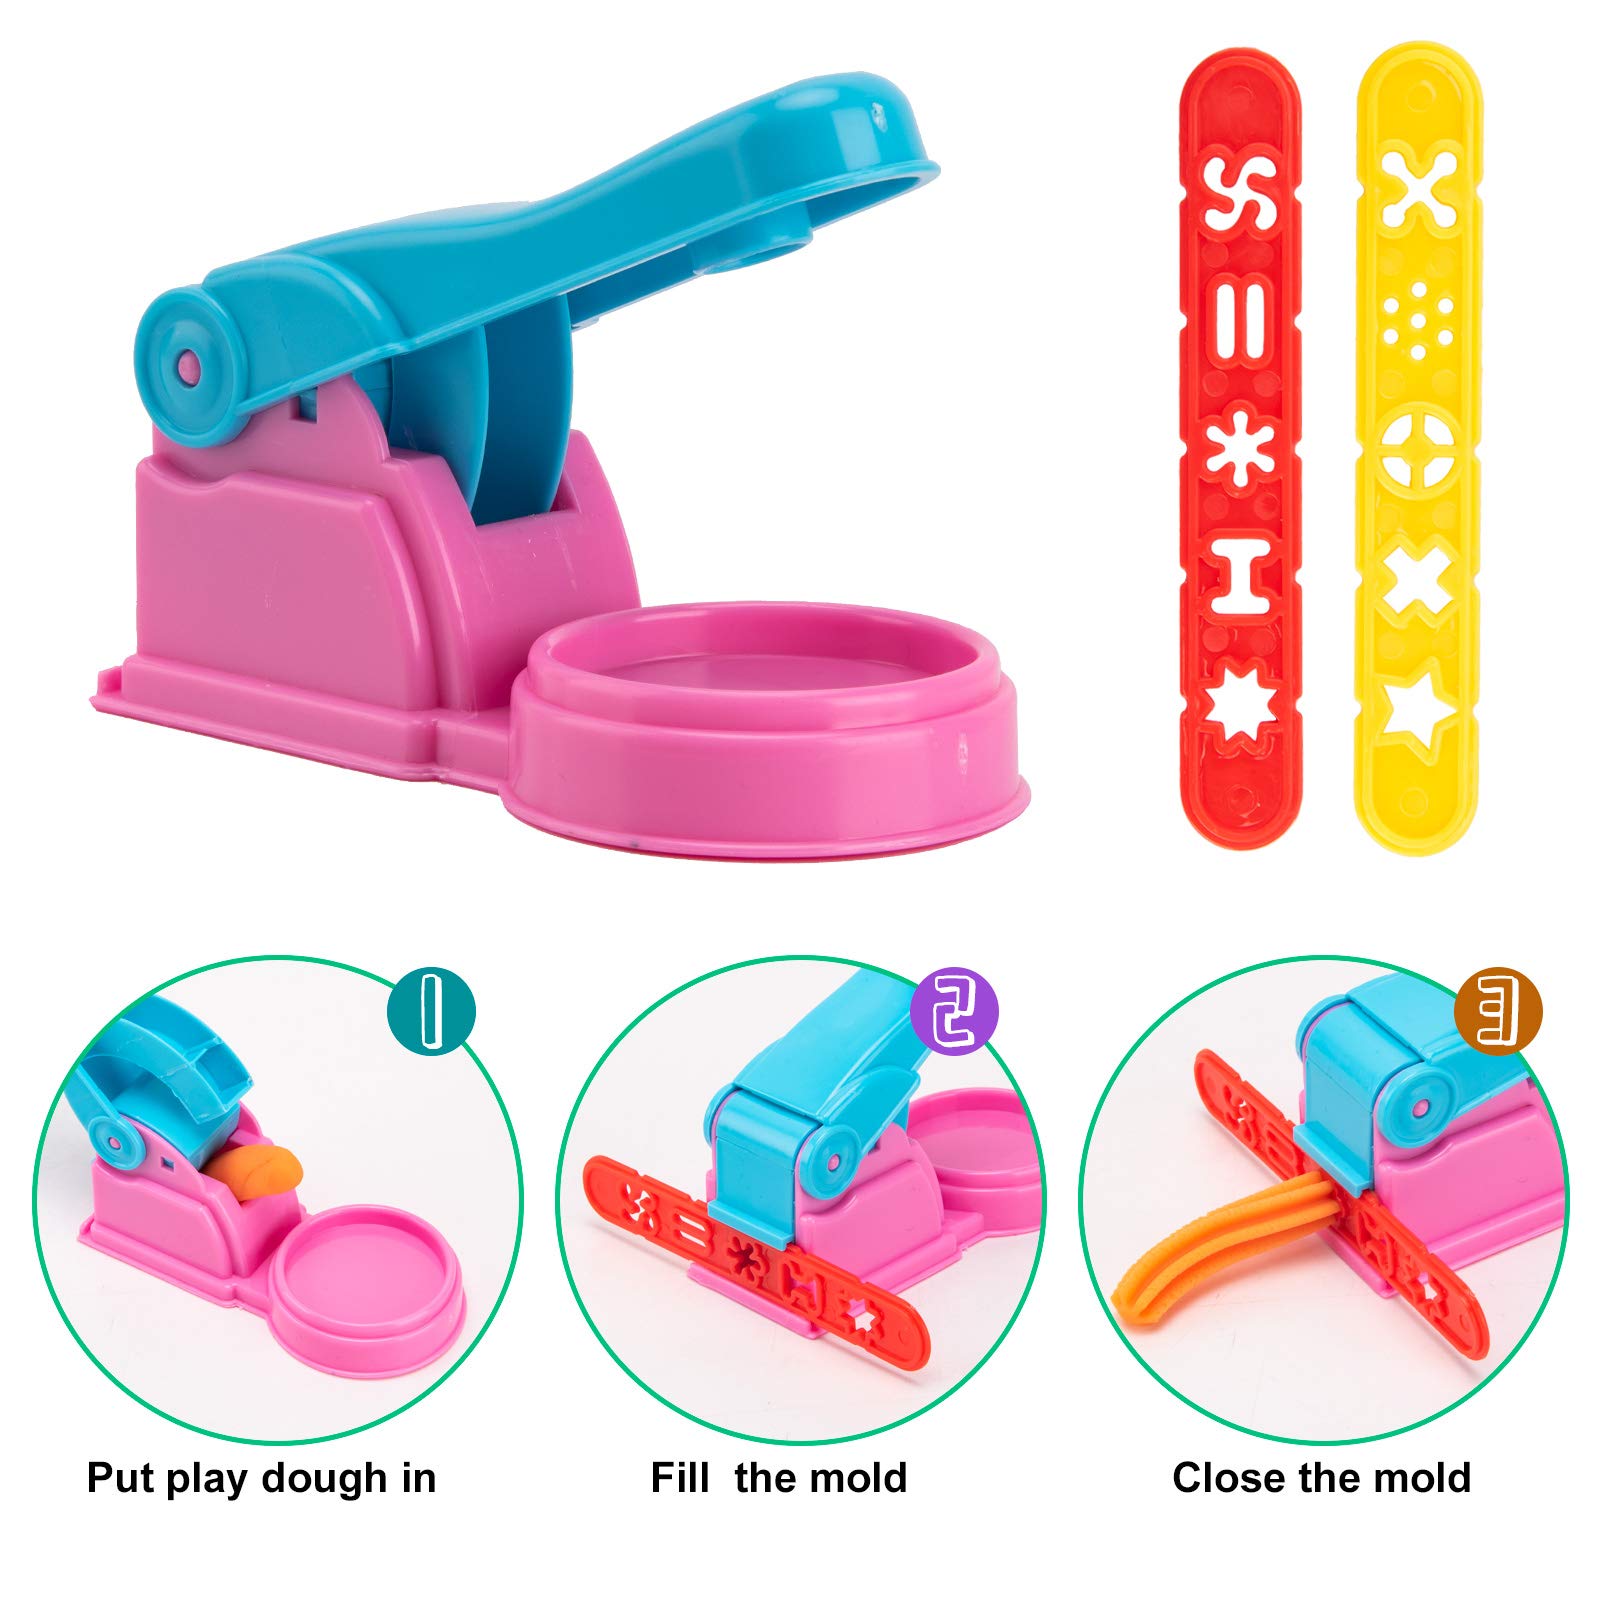 Maykid Play Dough Tools Set for Kids, 50pcs PlayDough Toys Includes Dough Accessory Molds Rollers Cutters Scissors and Storage Bag